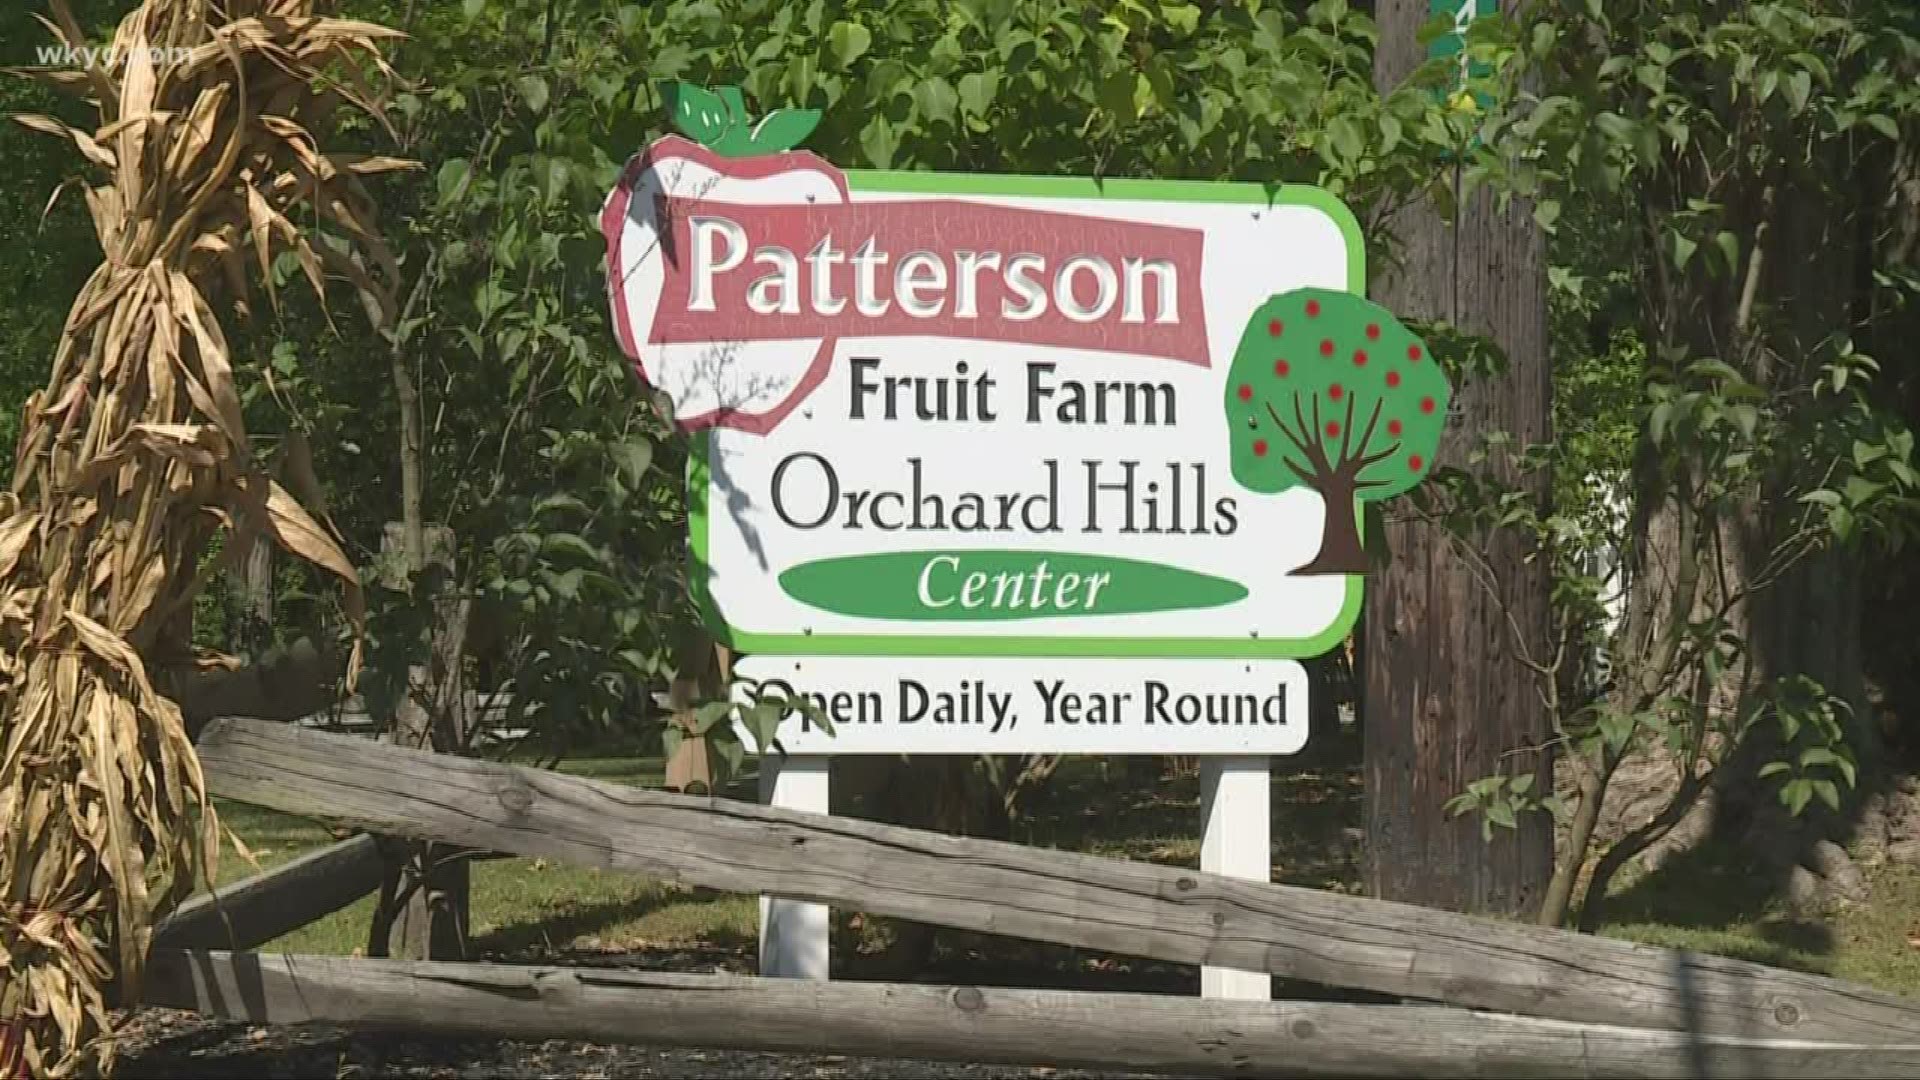 Patterson Fruit Farm has apples in farm market and is offering "pick your own" on a limited basis. Carl Bachtel reports.